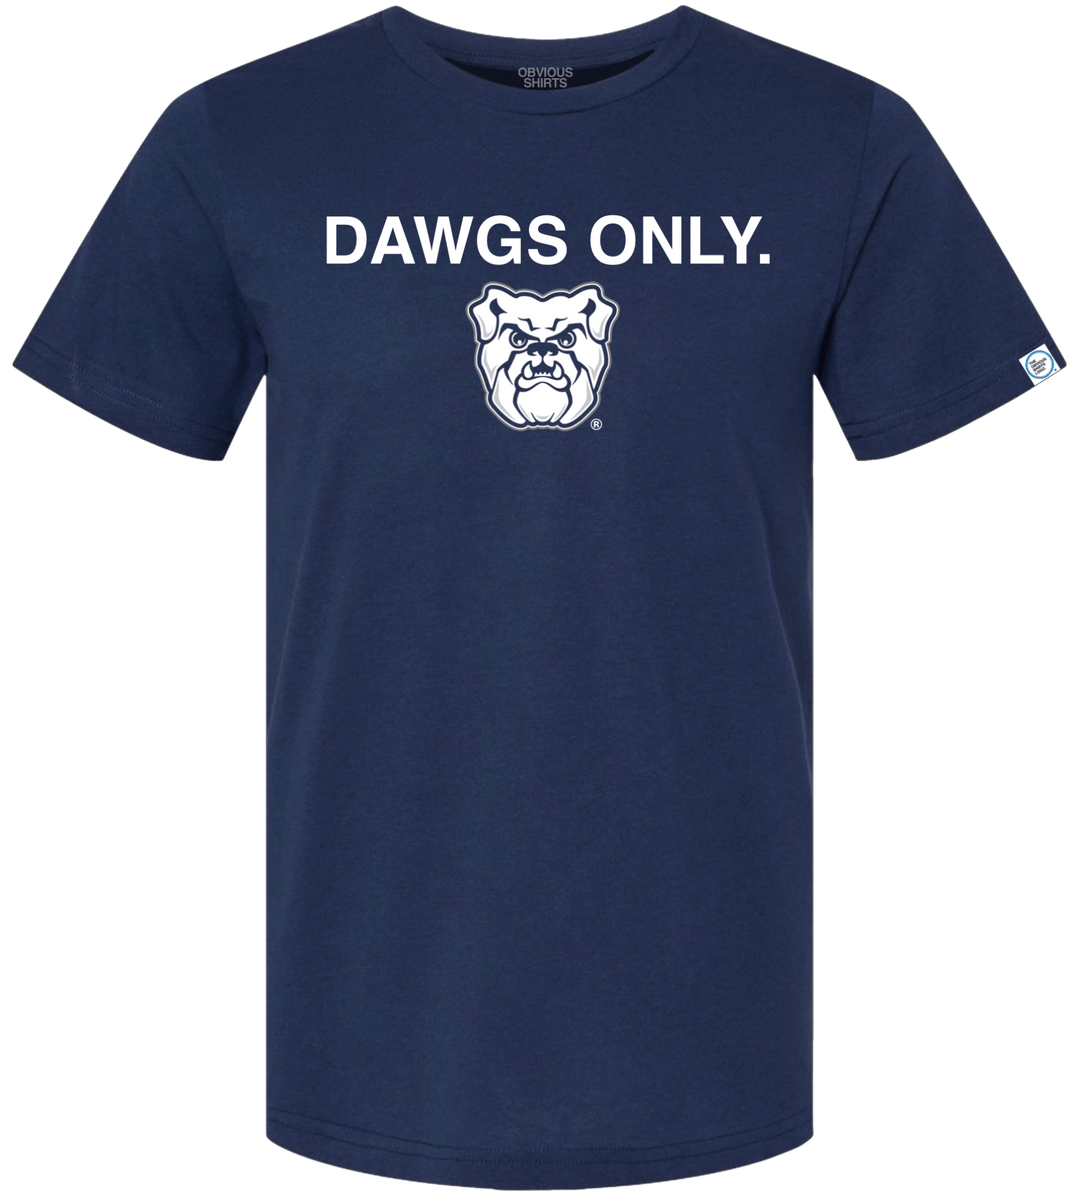 DAWGS ONLY. - OBVIOUS SHIRTS